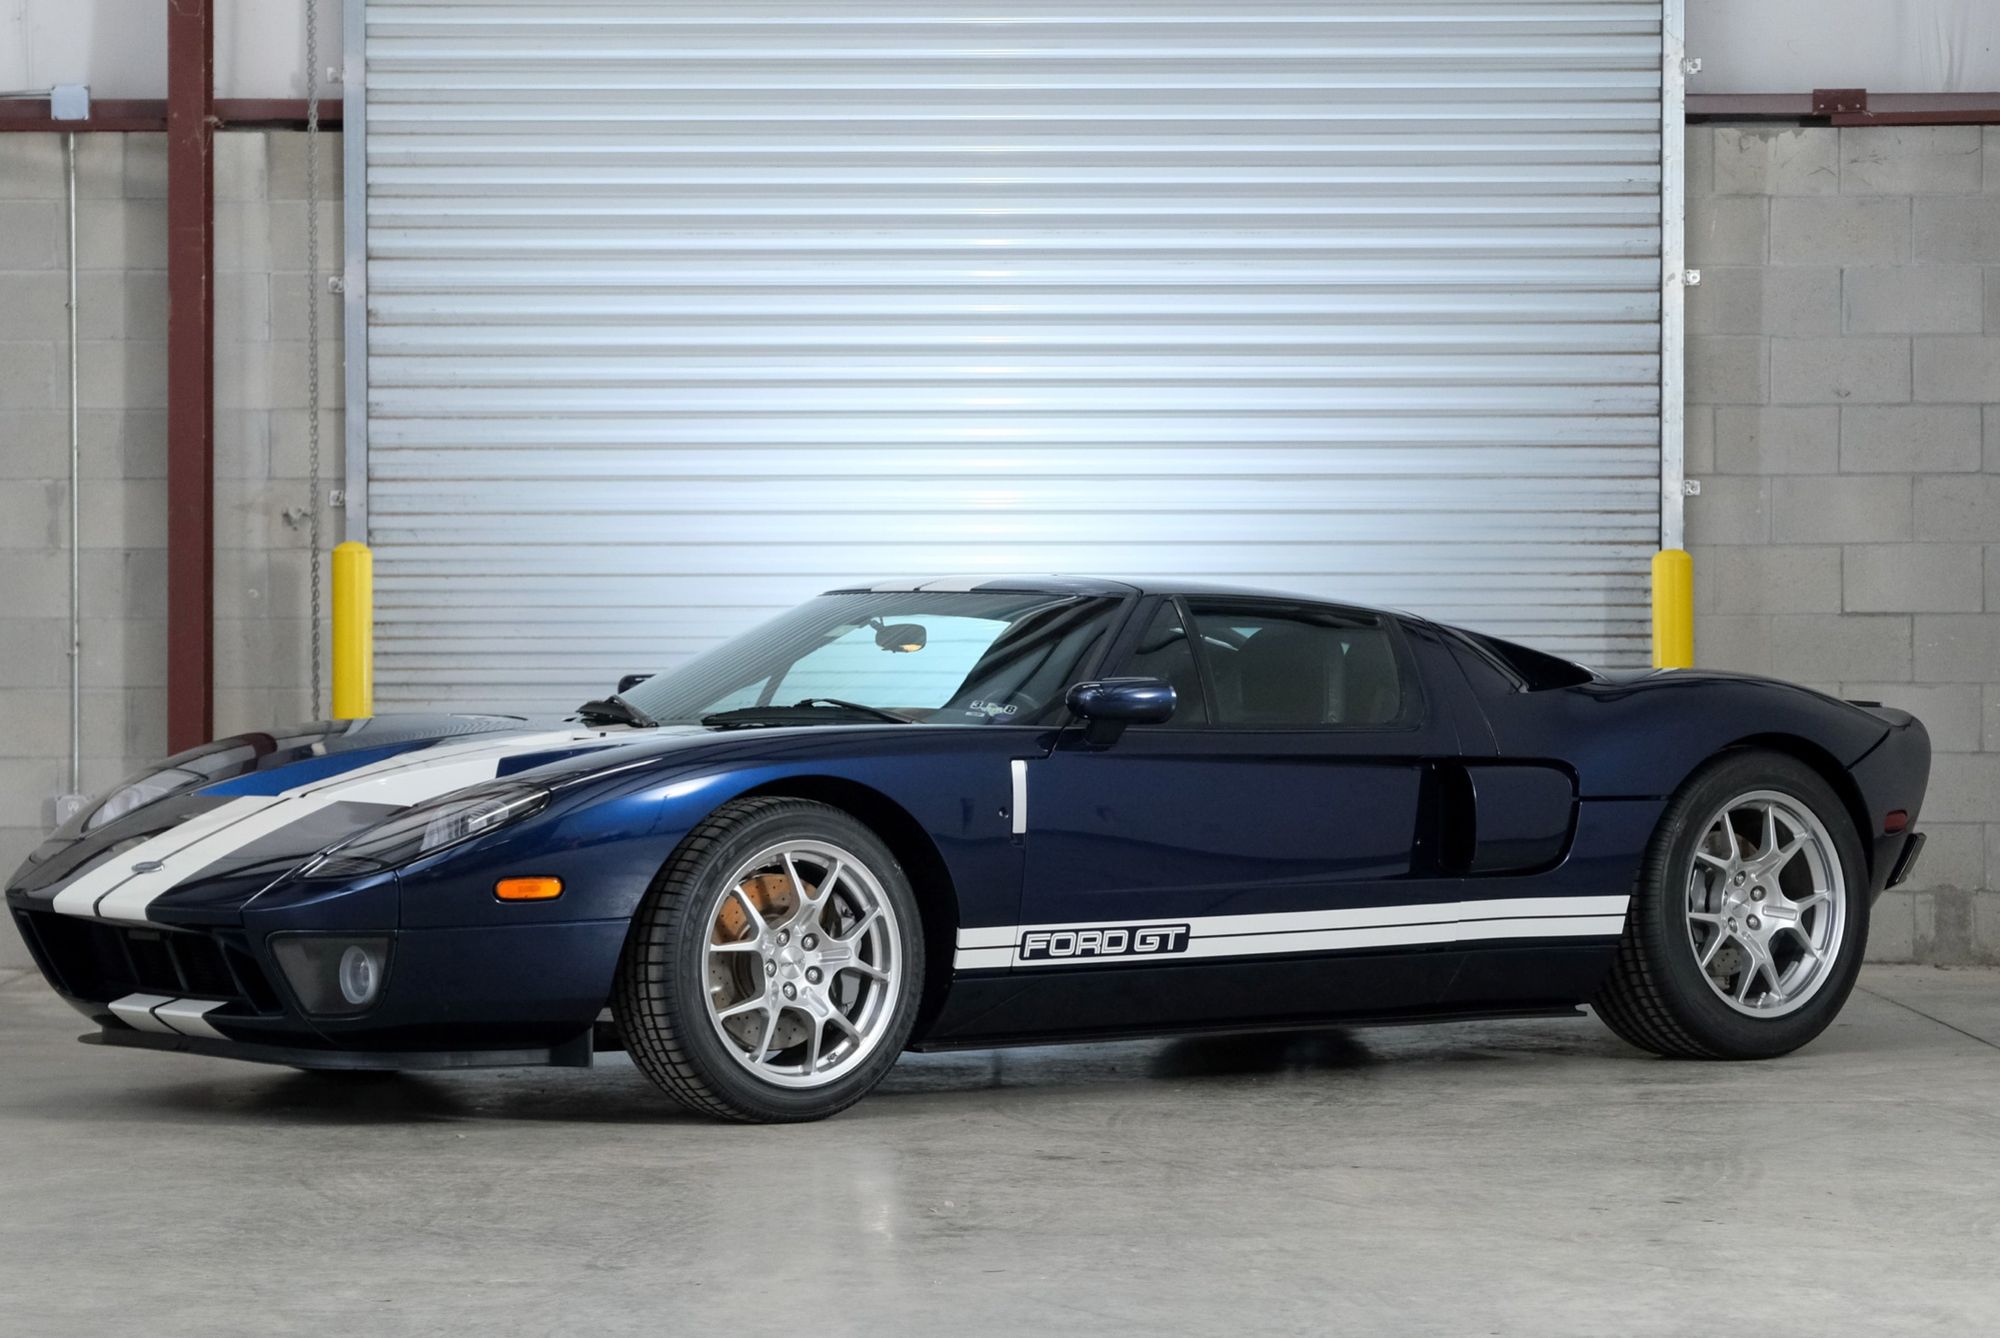 2006 Ford GT Is A Great American Supercar